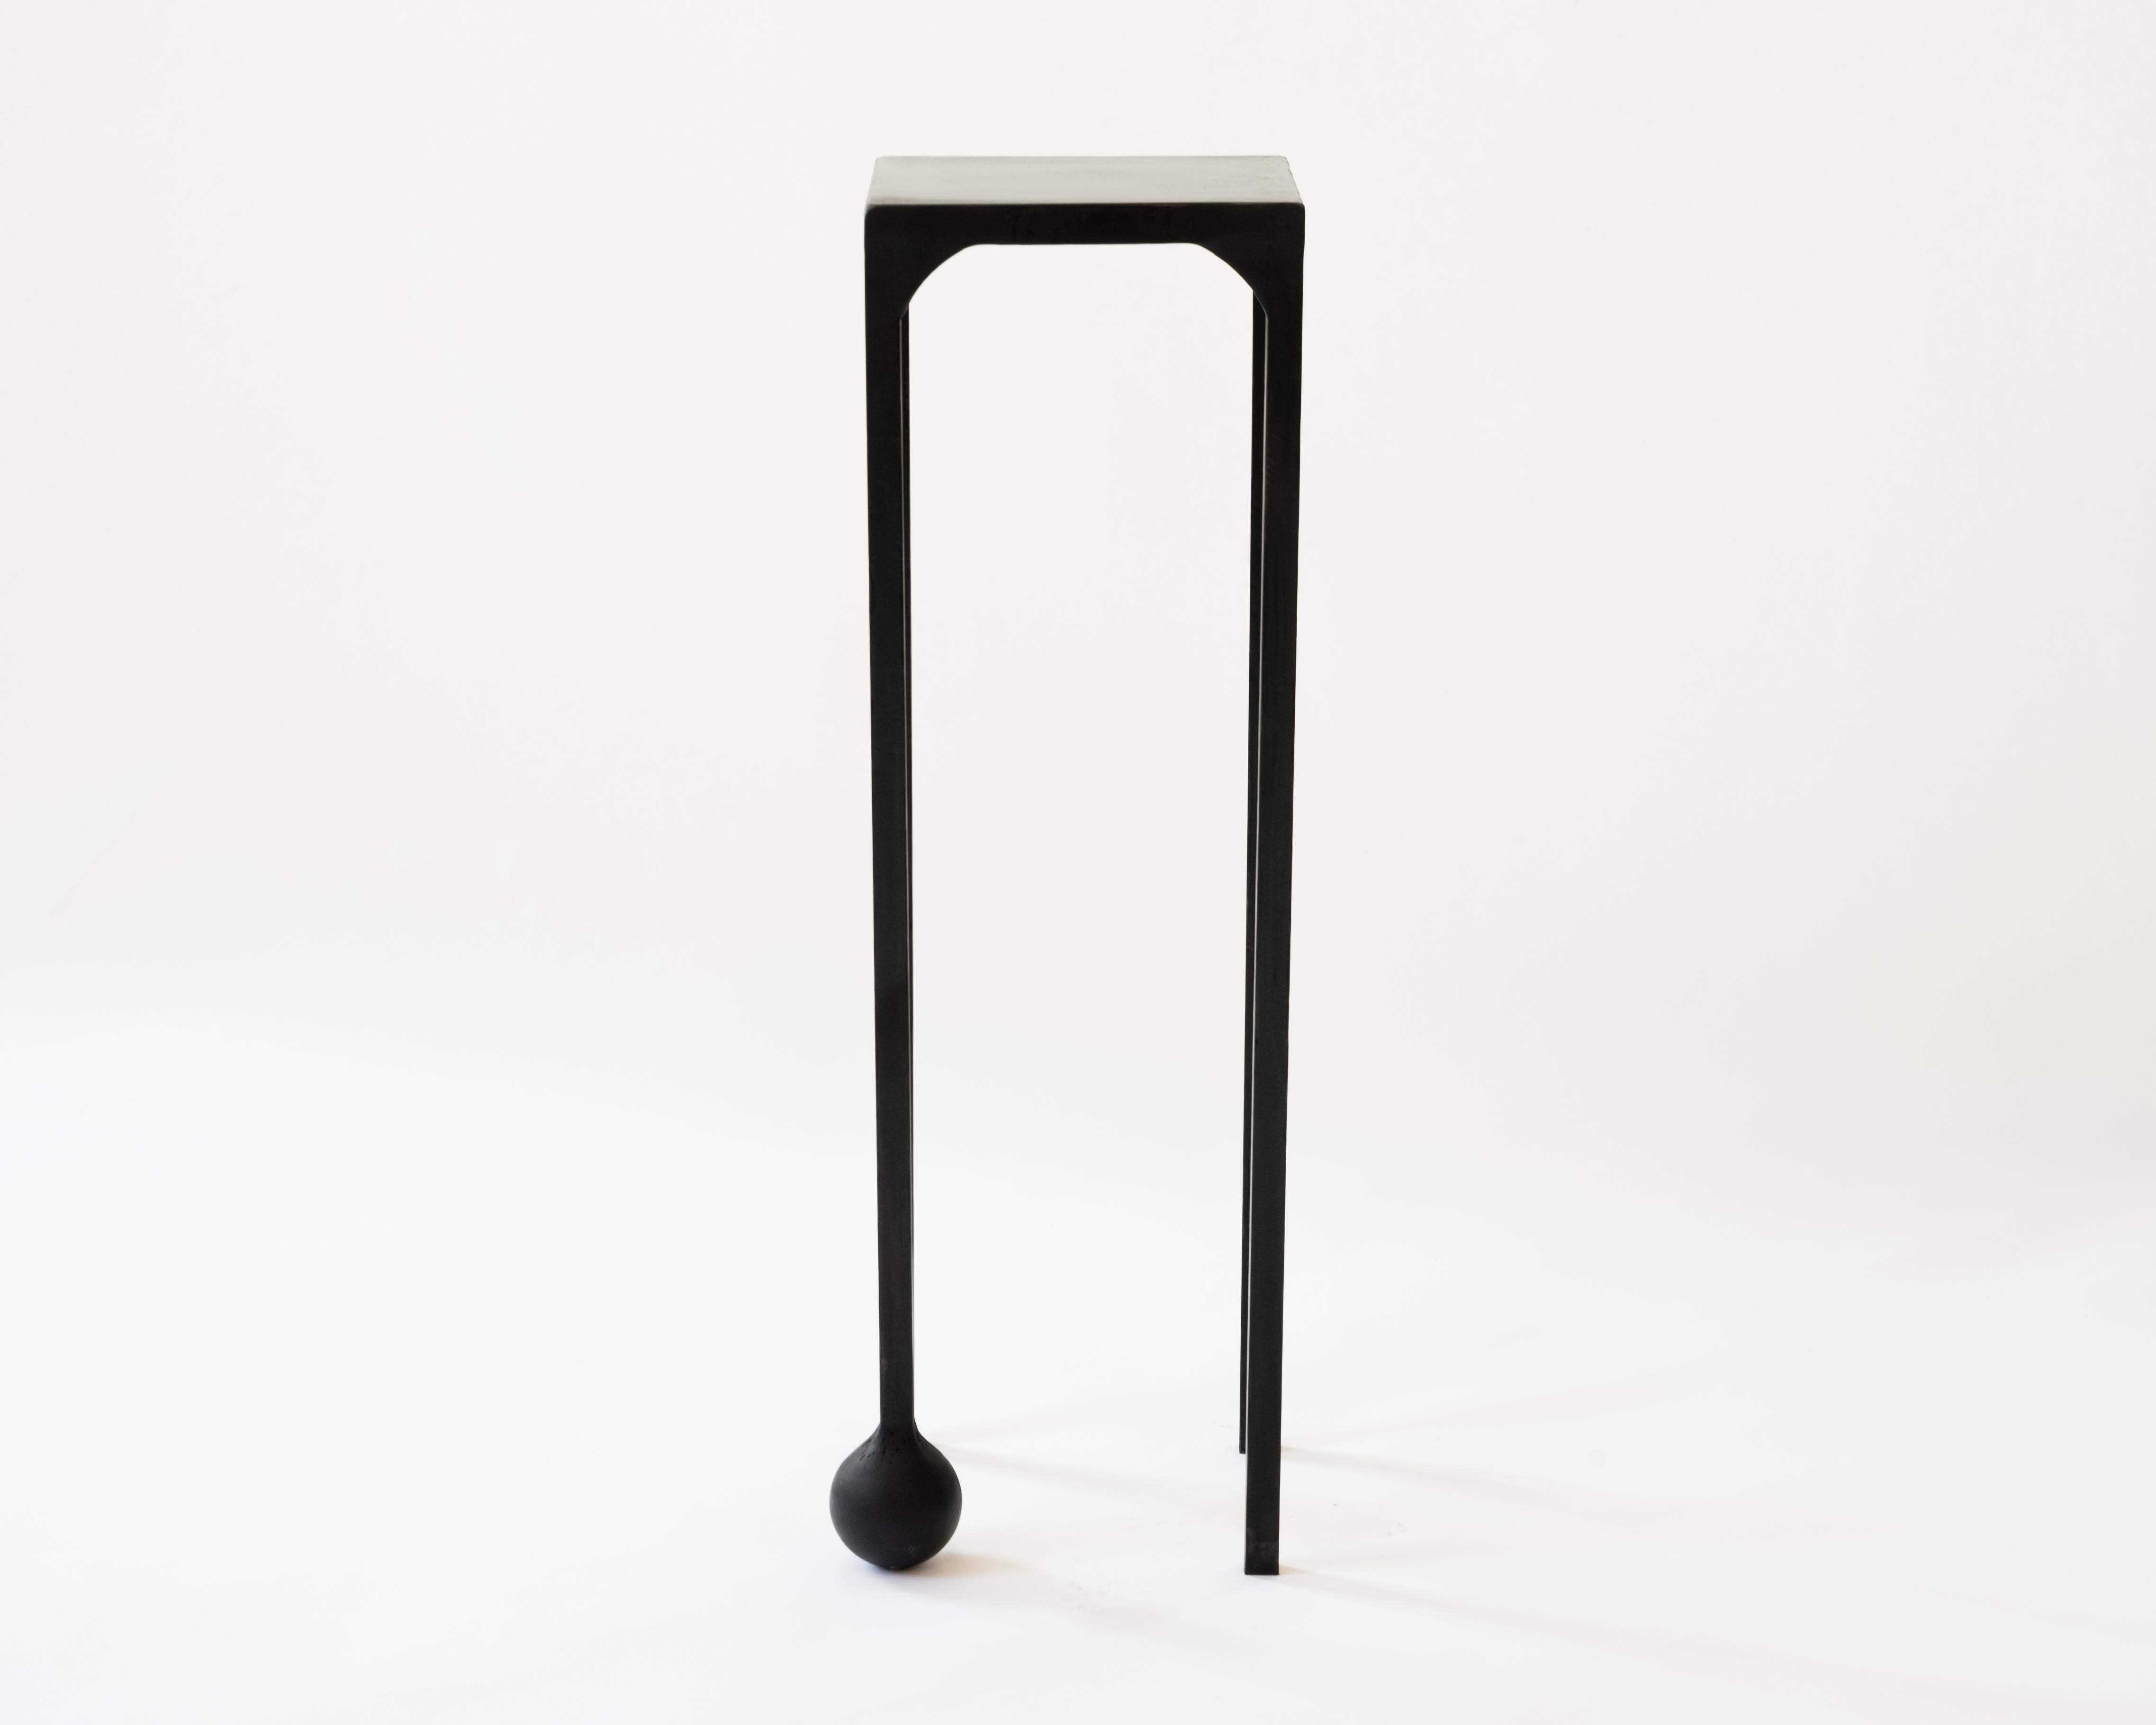 TABLE NO. 2 - Pedestal 
J.M. Szymanski
d. 2019

This geometric, solid, steel structure is supported by a cast-sphere base. The refined simplicity of this design speaks volumes, and adds depth and intrigue to any space. 

Custom sizes available. Made